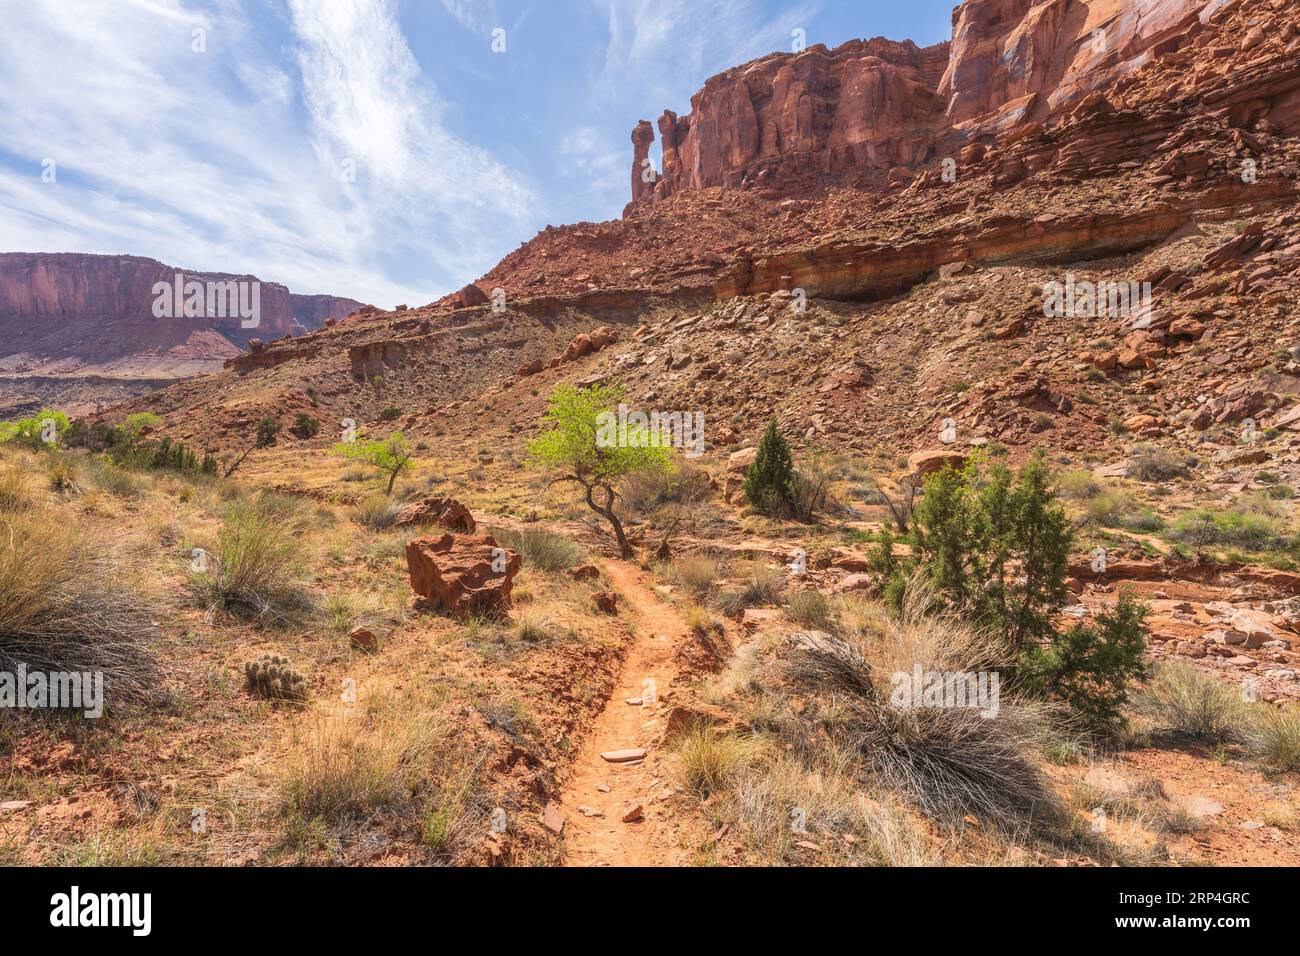 hiking the syncline loop trail in island in the sky district of canyonlands national park in utah, usa Stock Photo